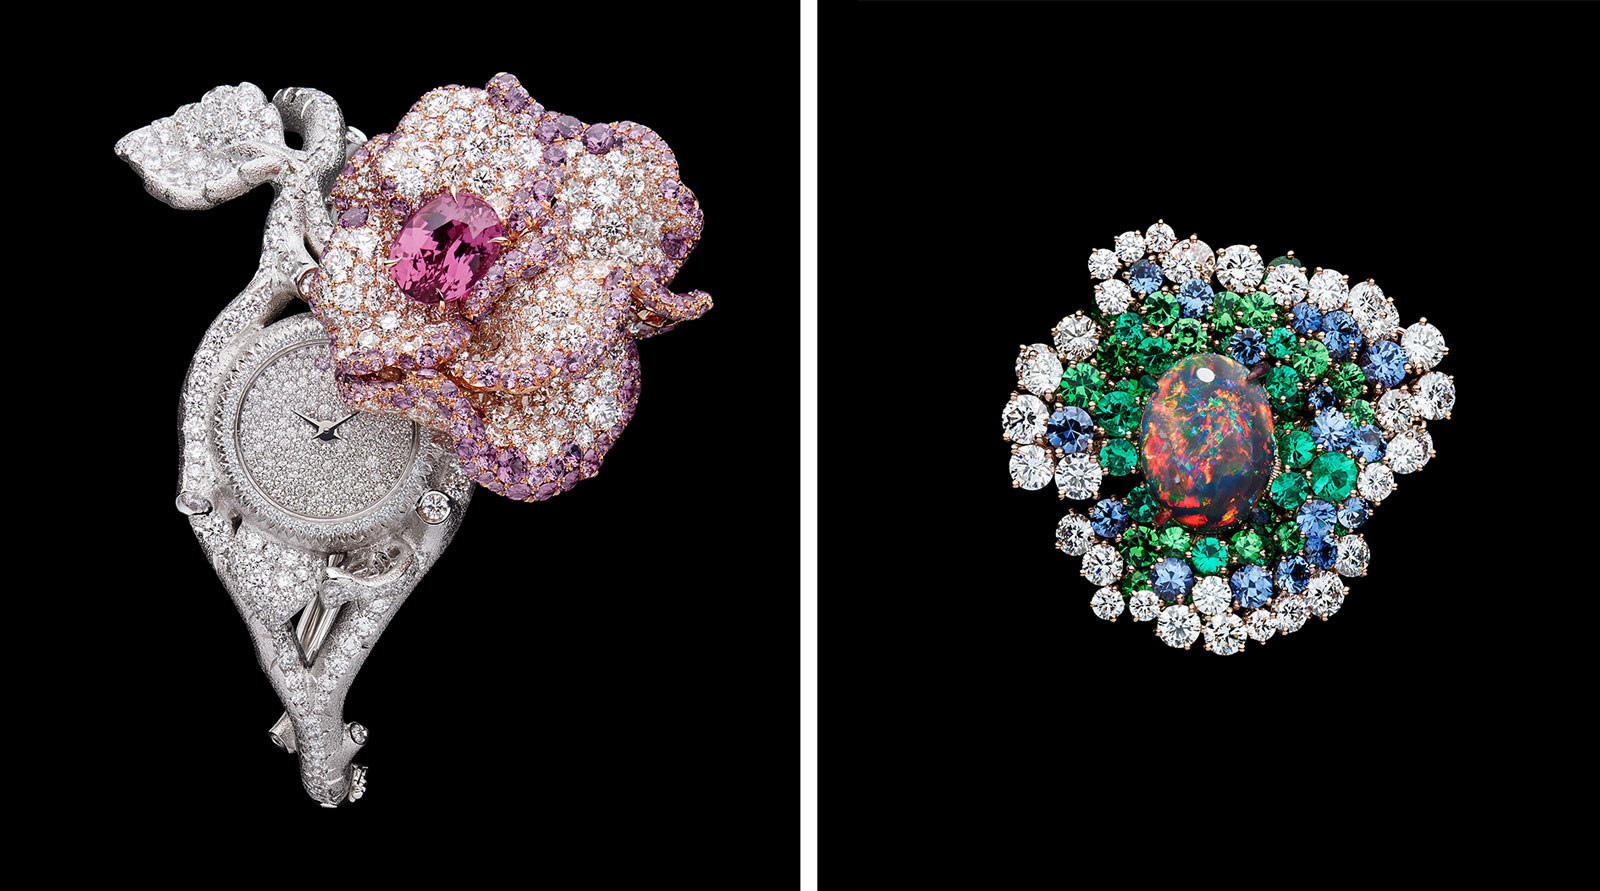 5 Things To Know About Dior's New Couture-Inspired High Jewelry Collection